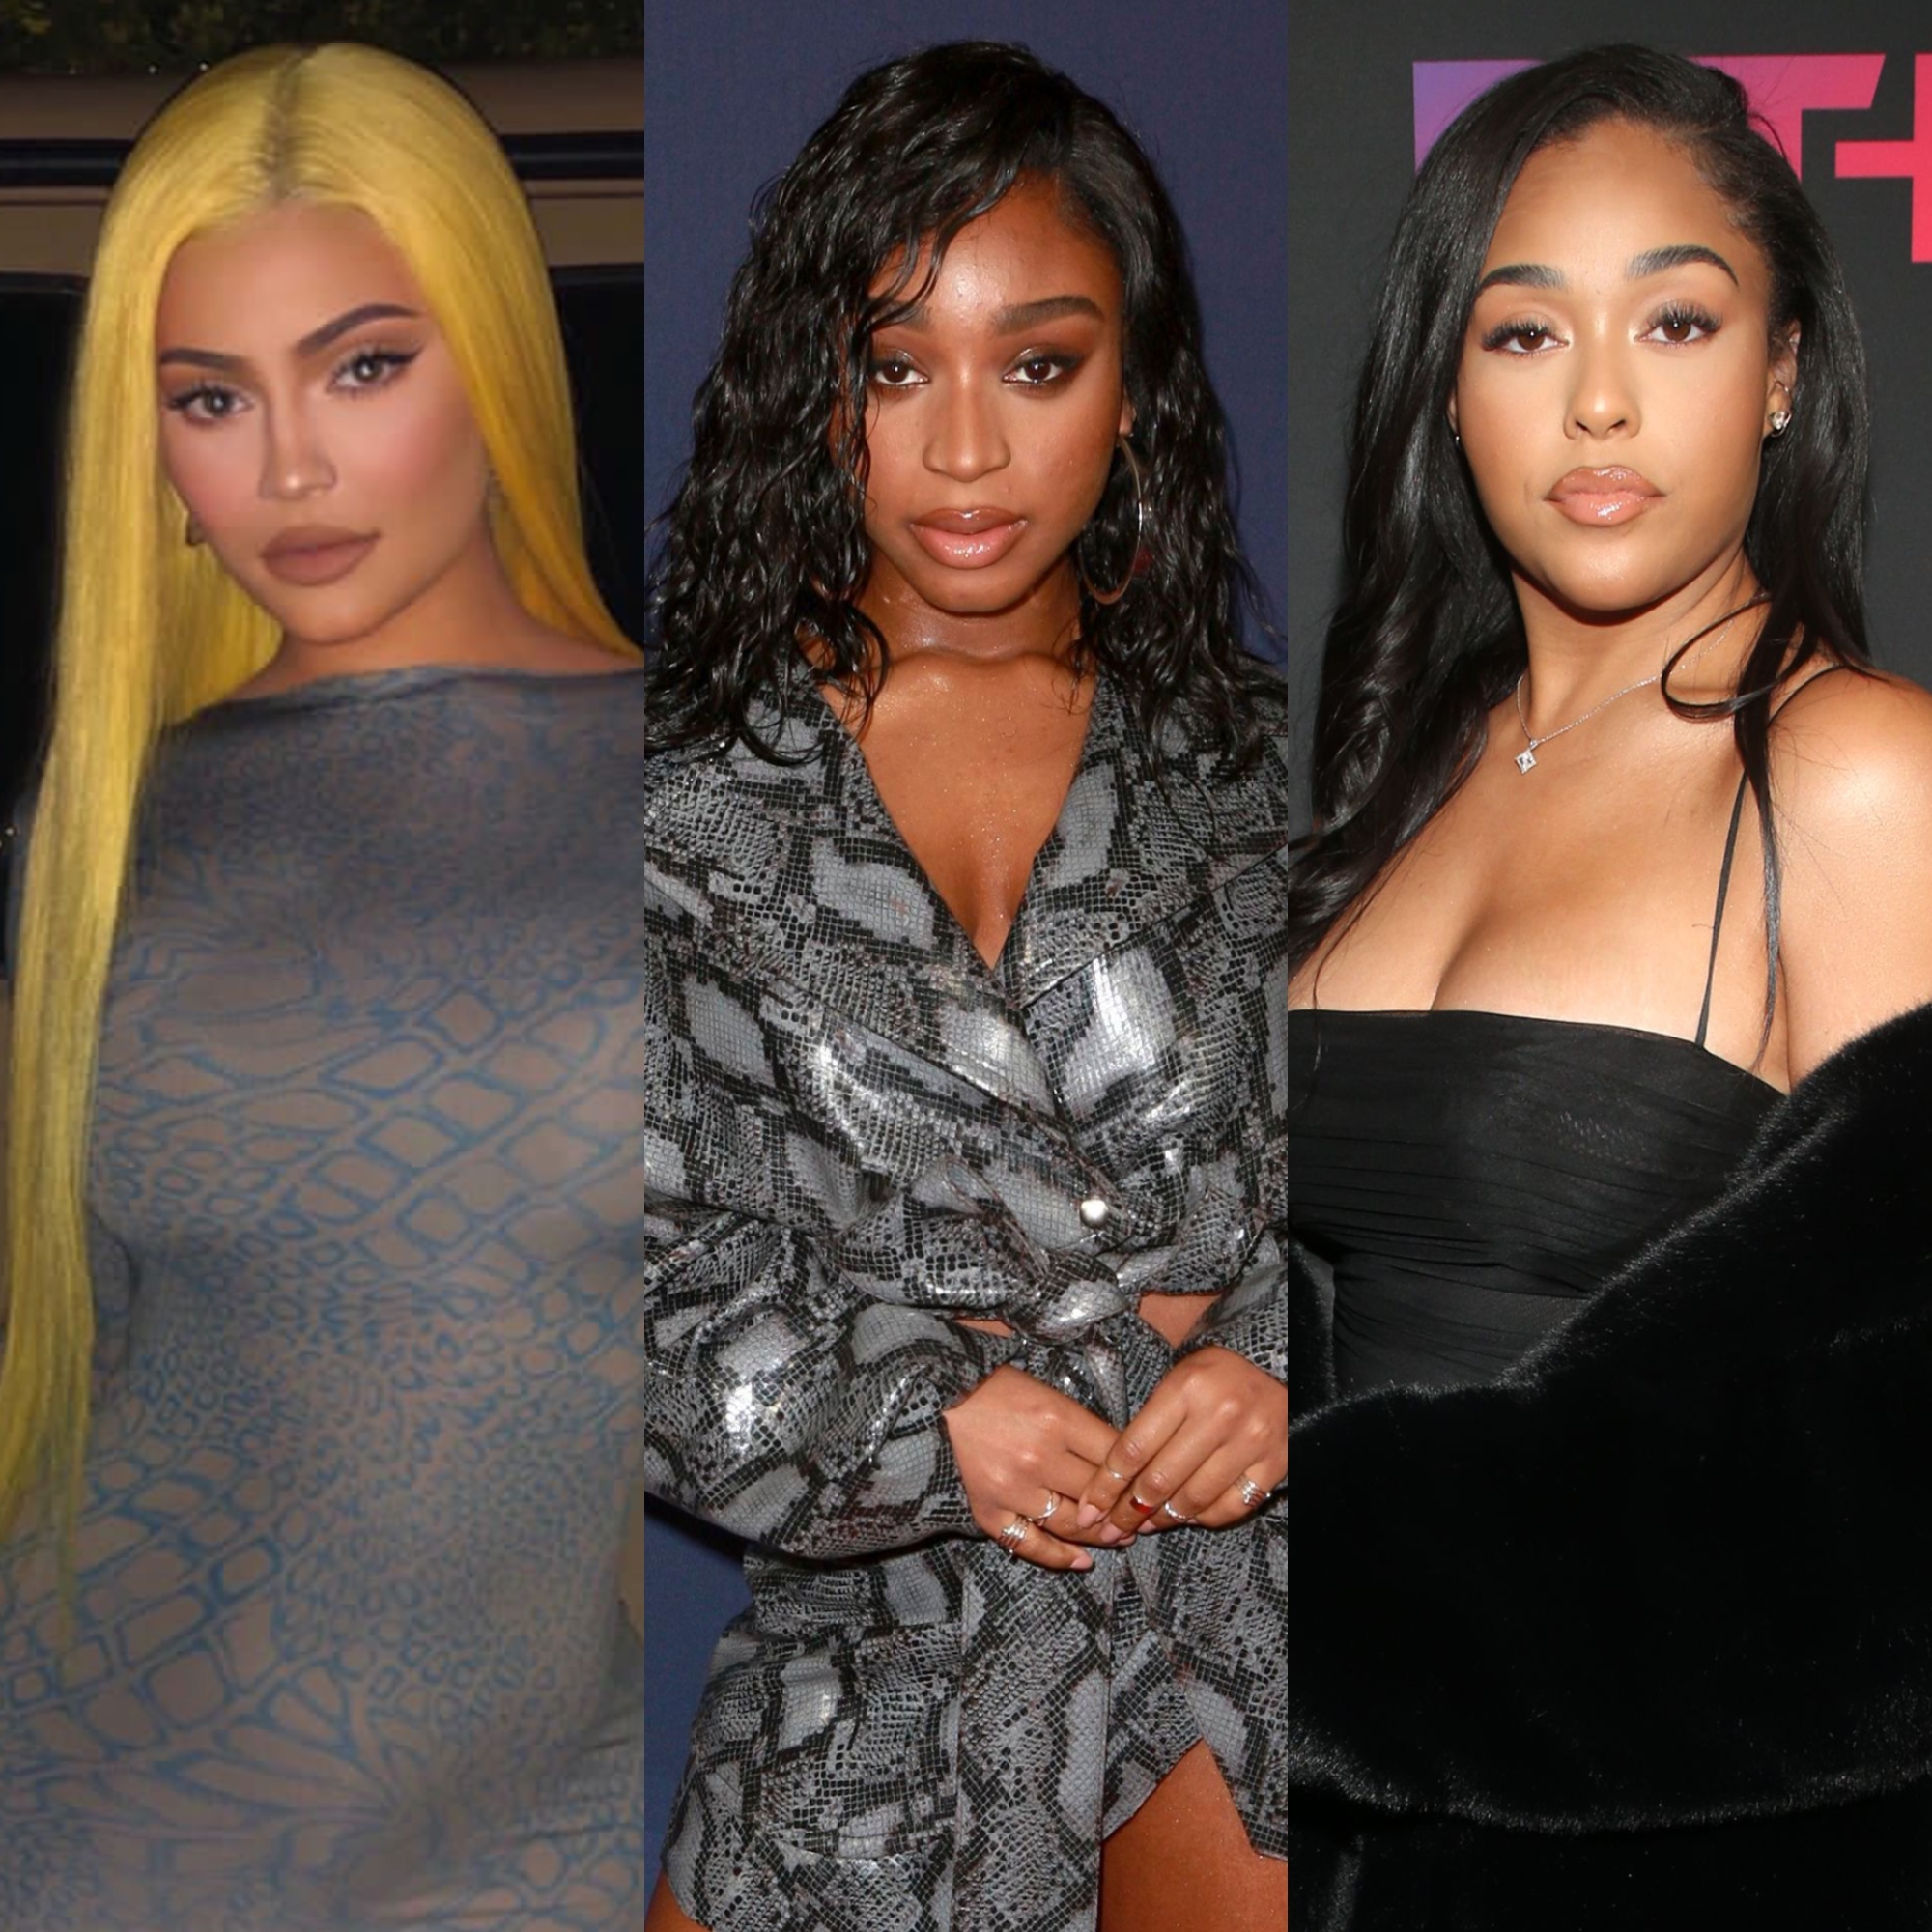 Kylie Jenner's ex-BFF Jordyn Woods shows off her cool style in new Instagram  snaps